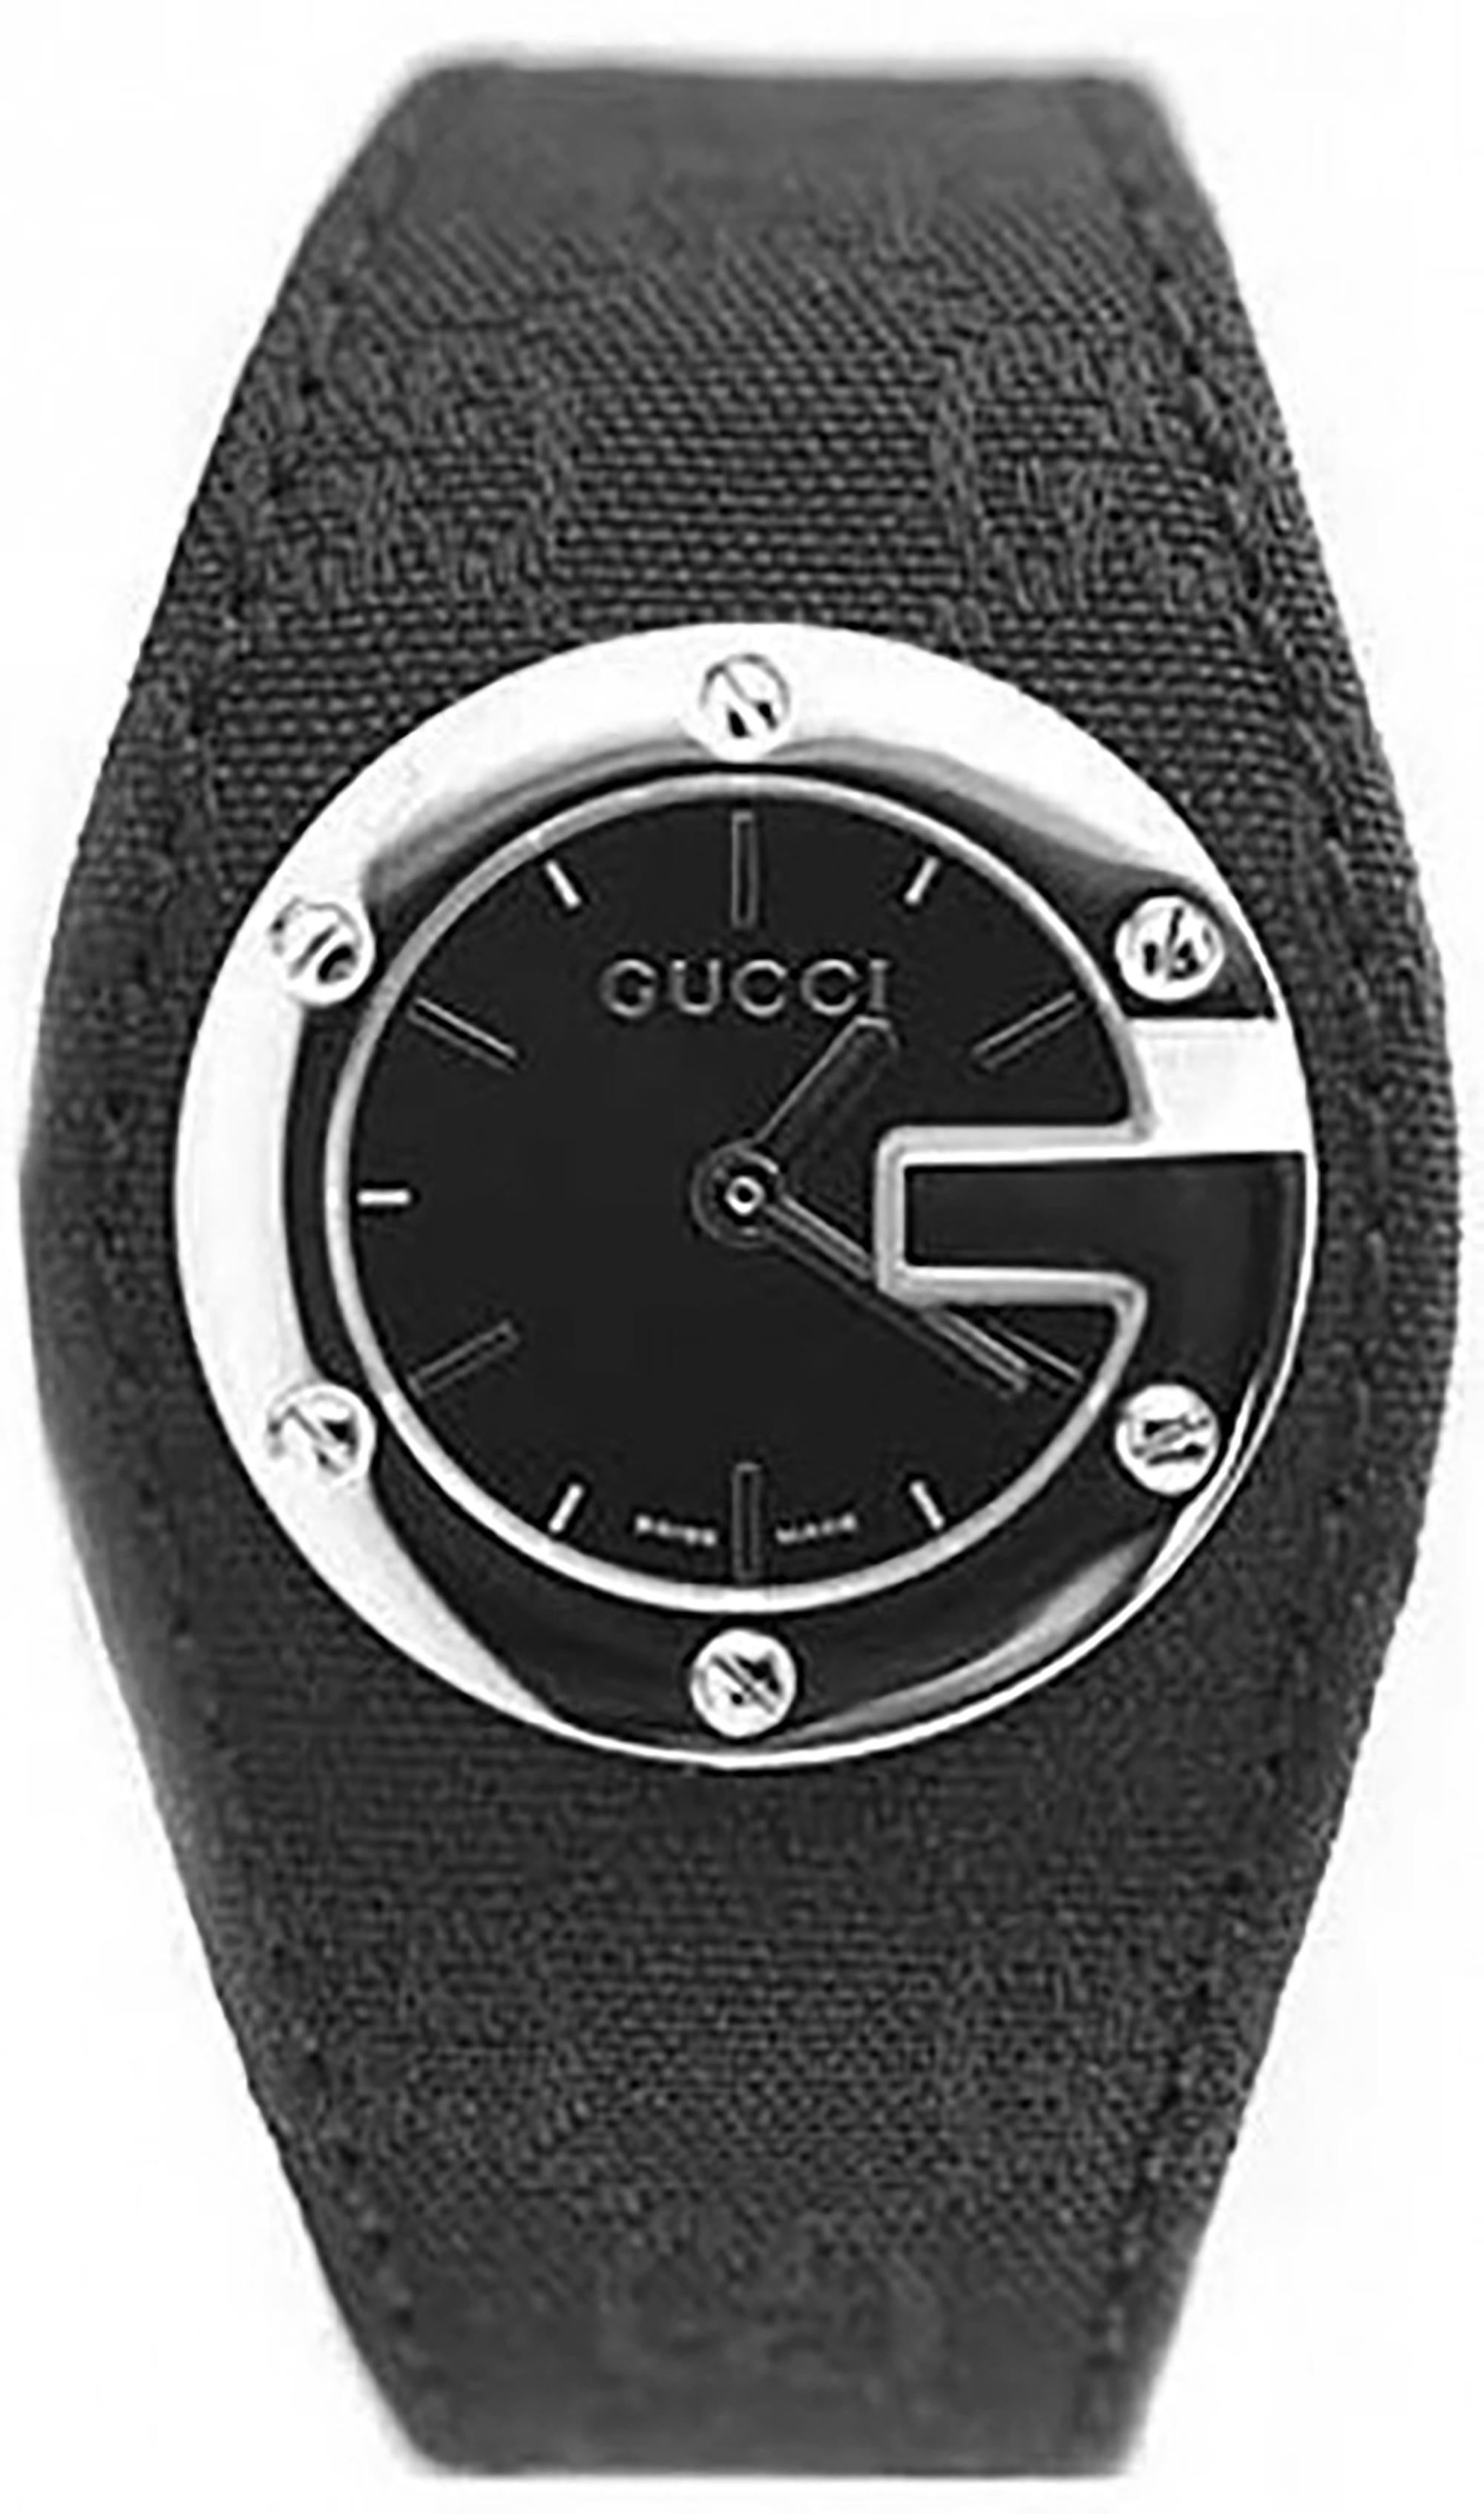 This brand new Gucci   is a beautiful  timepiece that is powered by  movement which is cased in a  case. It has a round shape face,  dial and has hand  style markers. It is completed with a  band that opens and closes with a . This watch comes with